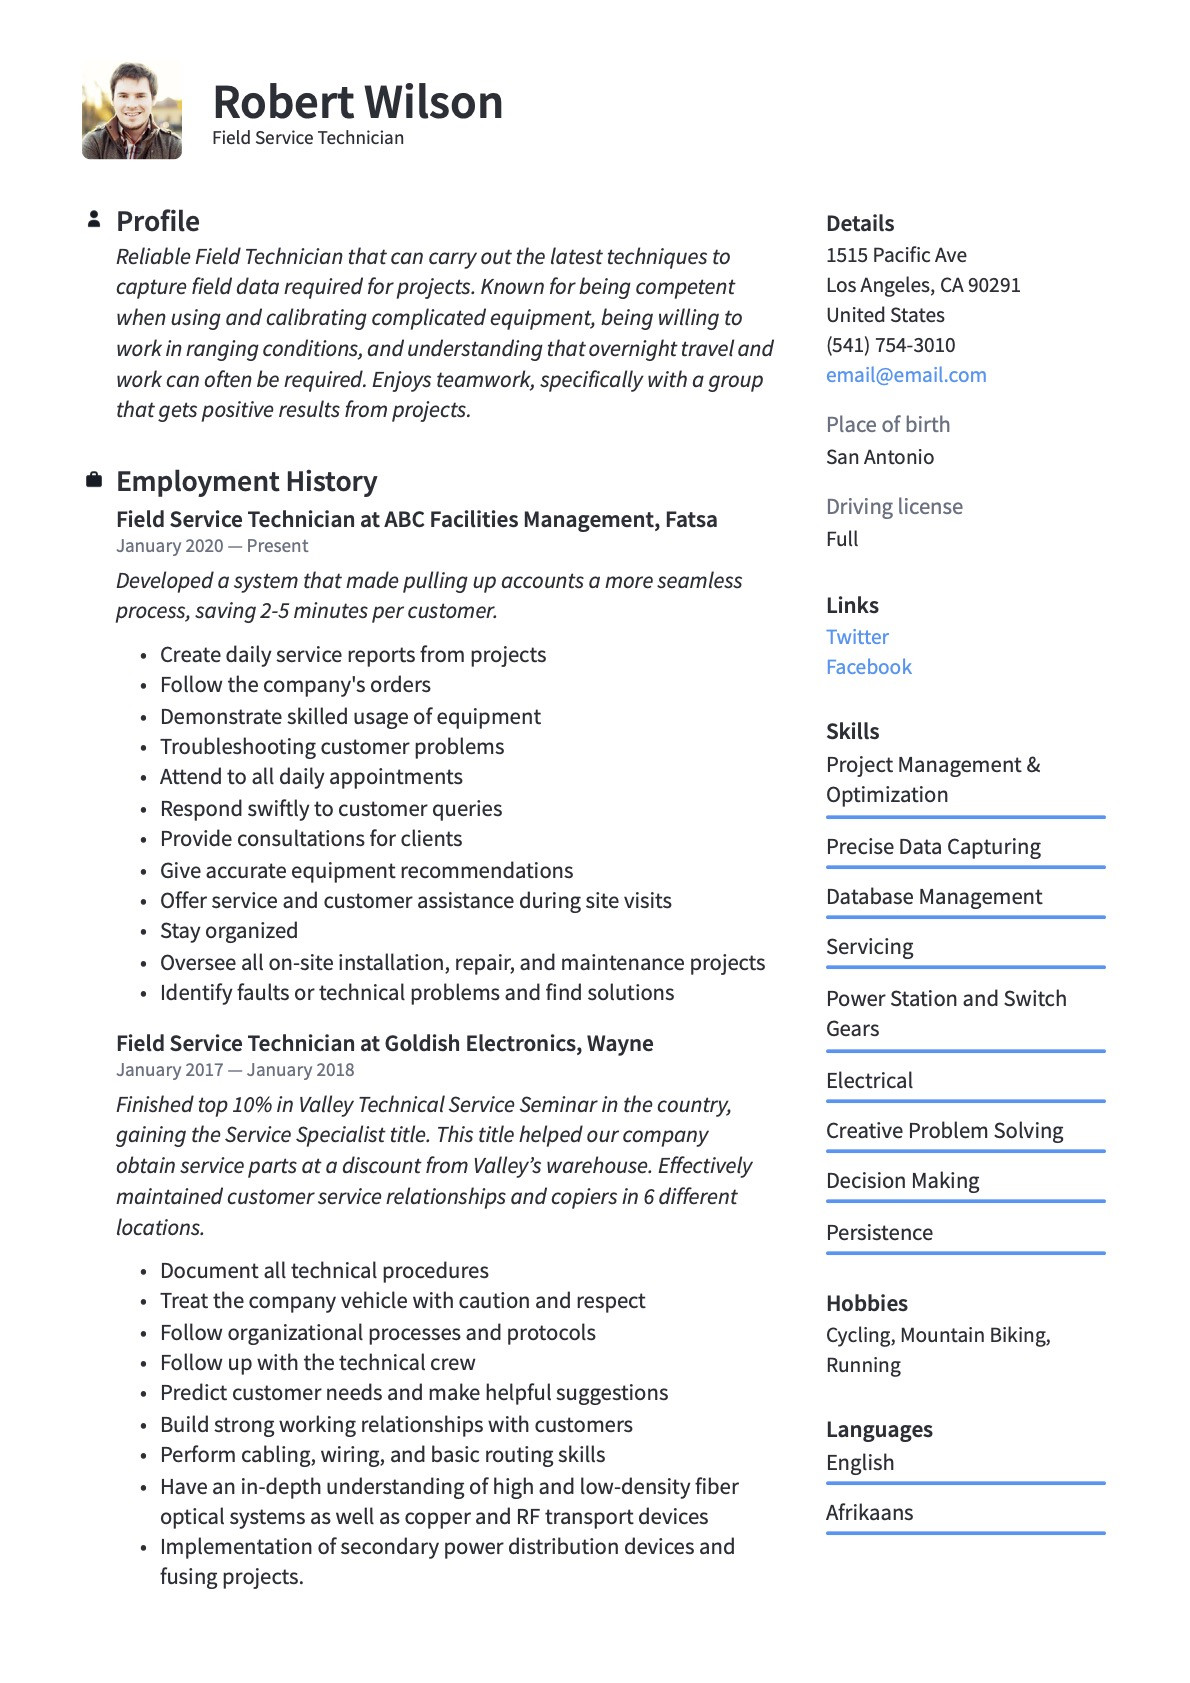 Sample Resume for Utility and Maintenance Engineer Field Service Technician Resume & Guide  20 Examples 2022